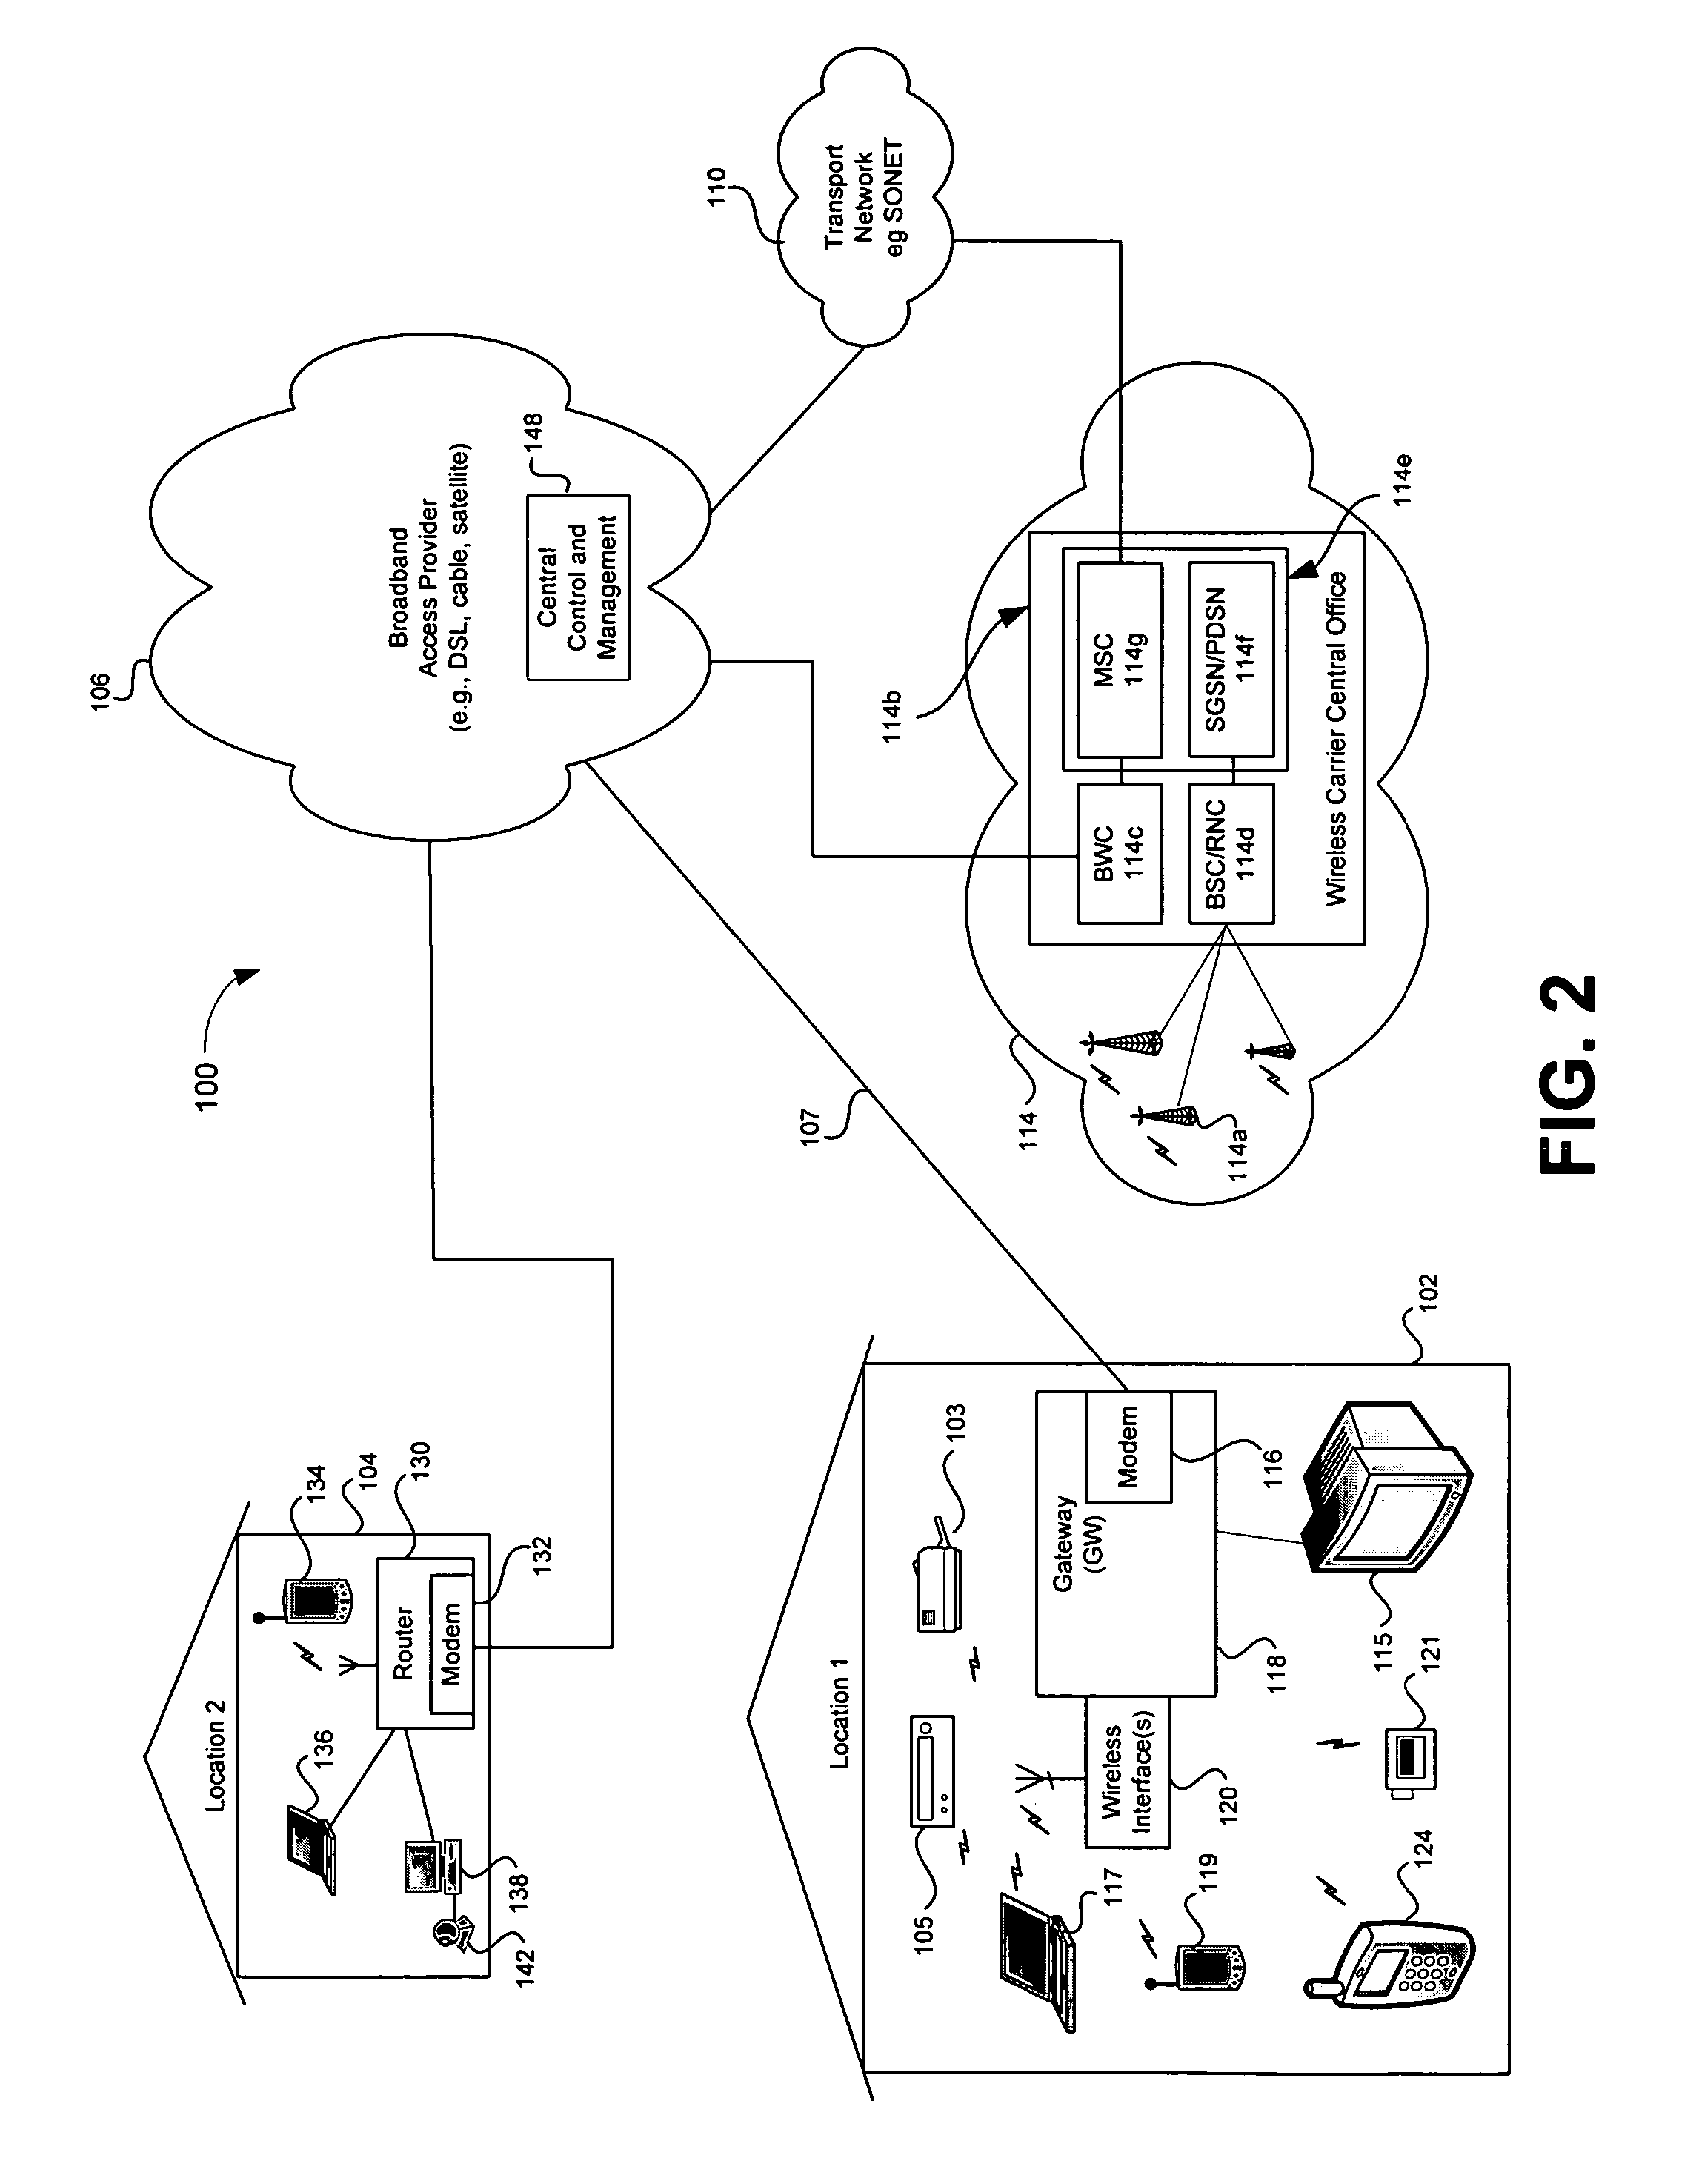 Distributed storage and aggregation of multimedia information via a broadband access gateway